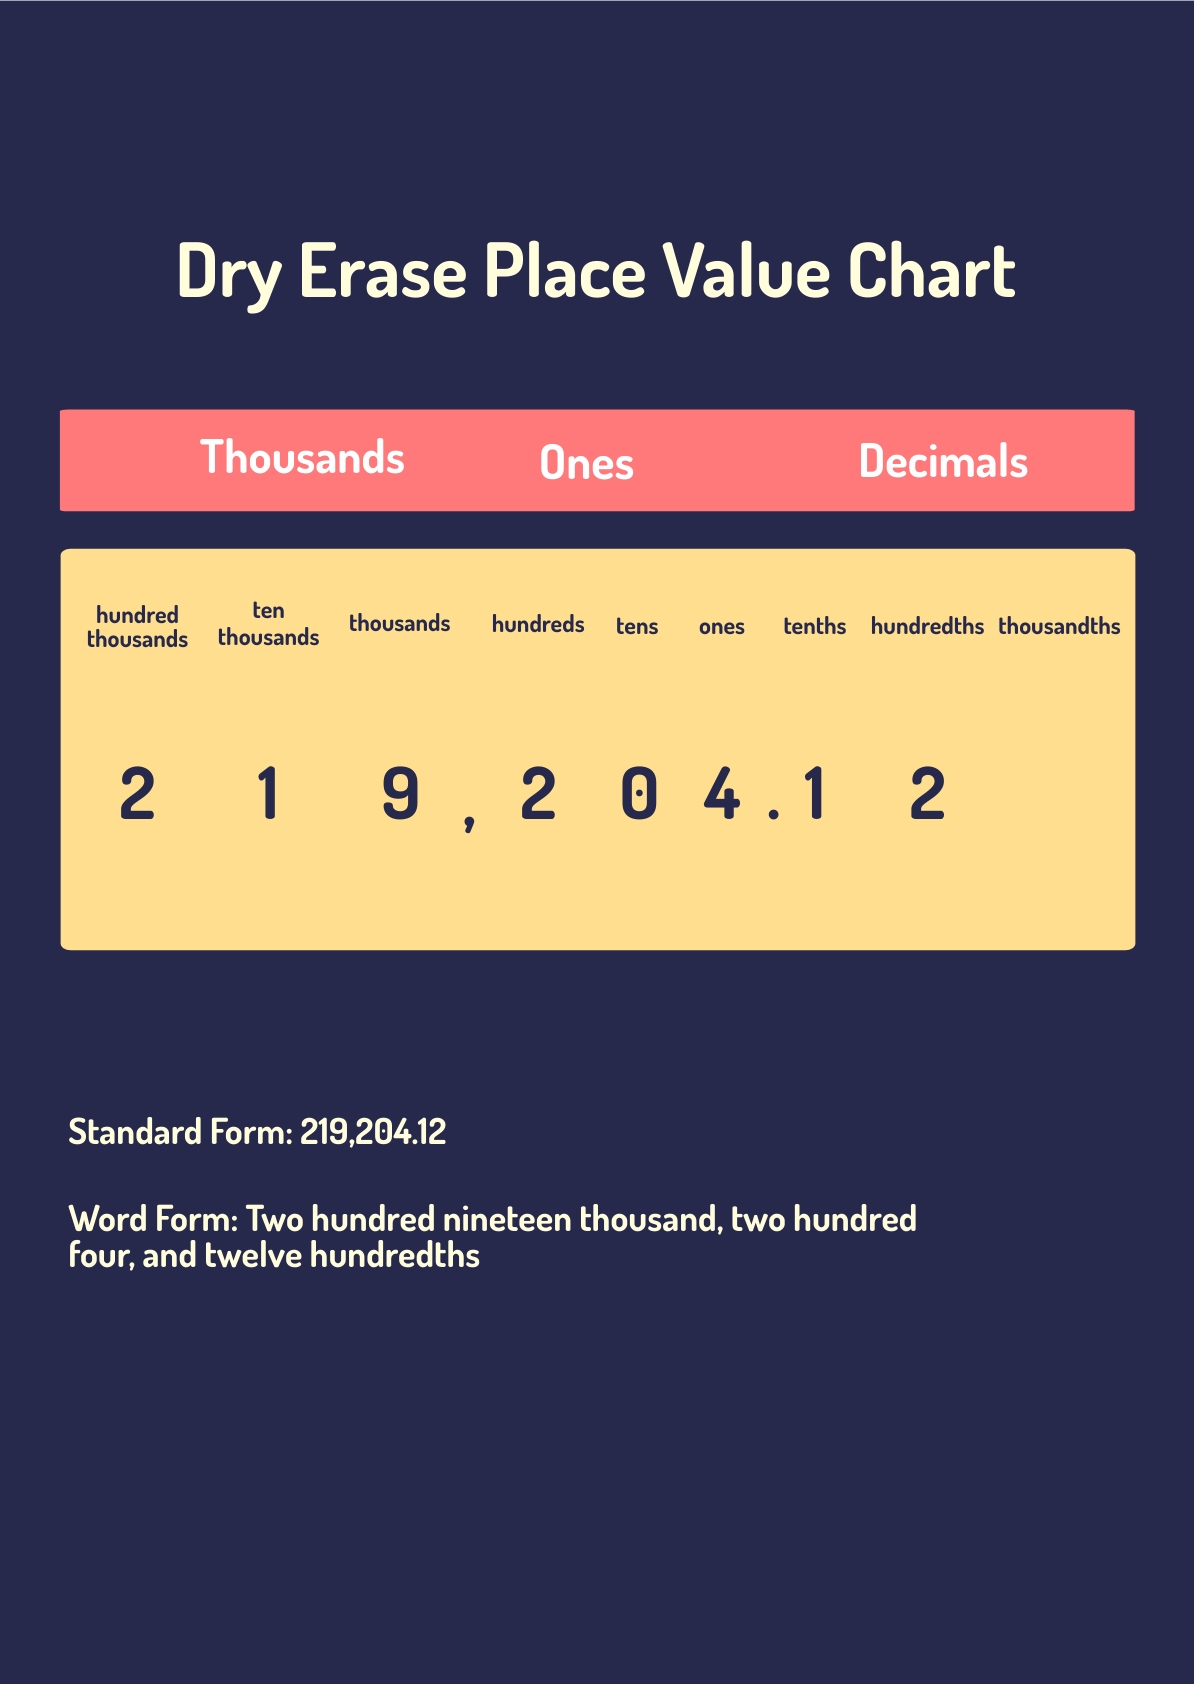 Dry Erase Place Value Chart in PDF, Illustrator